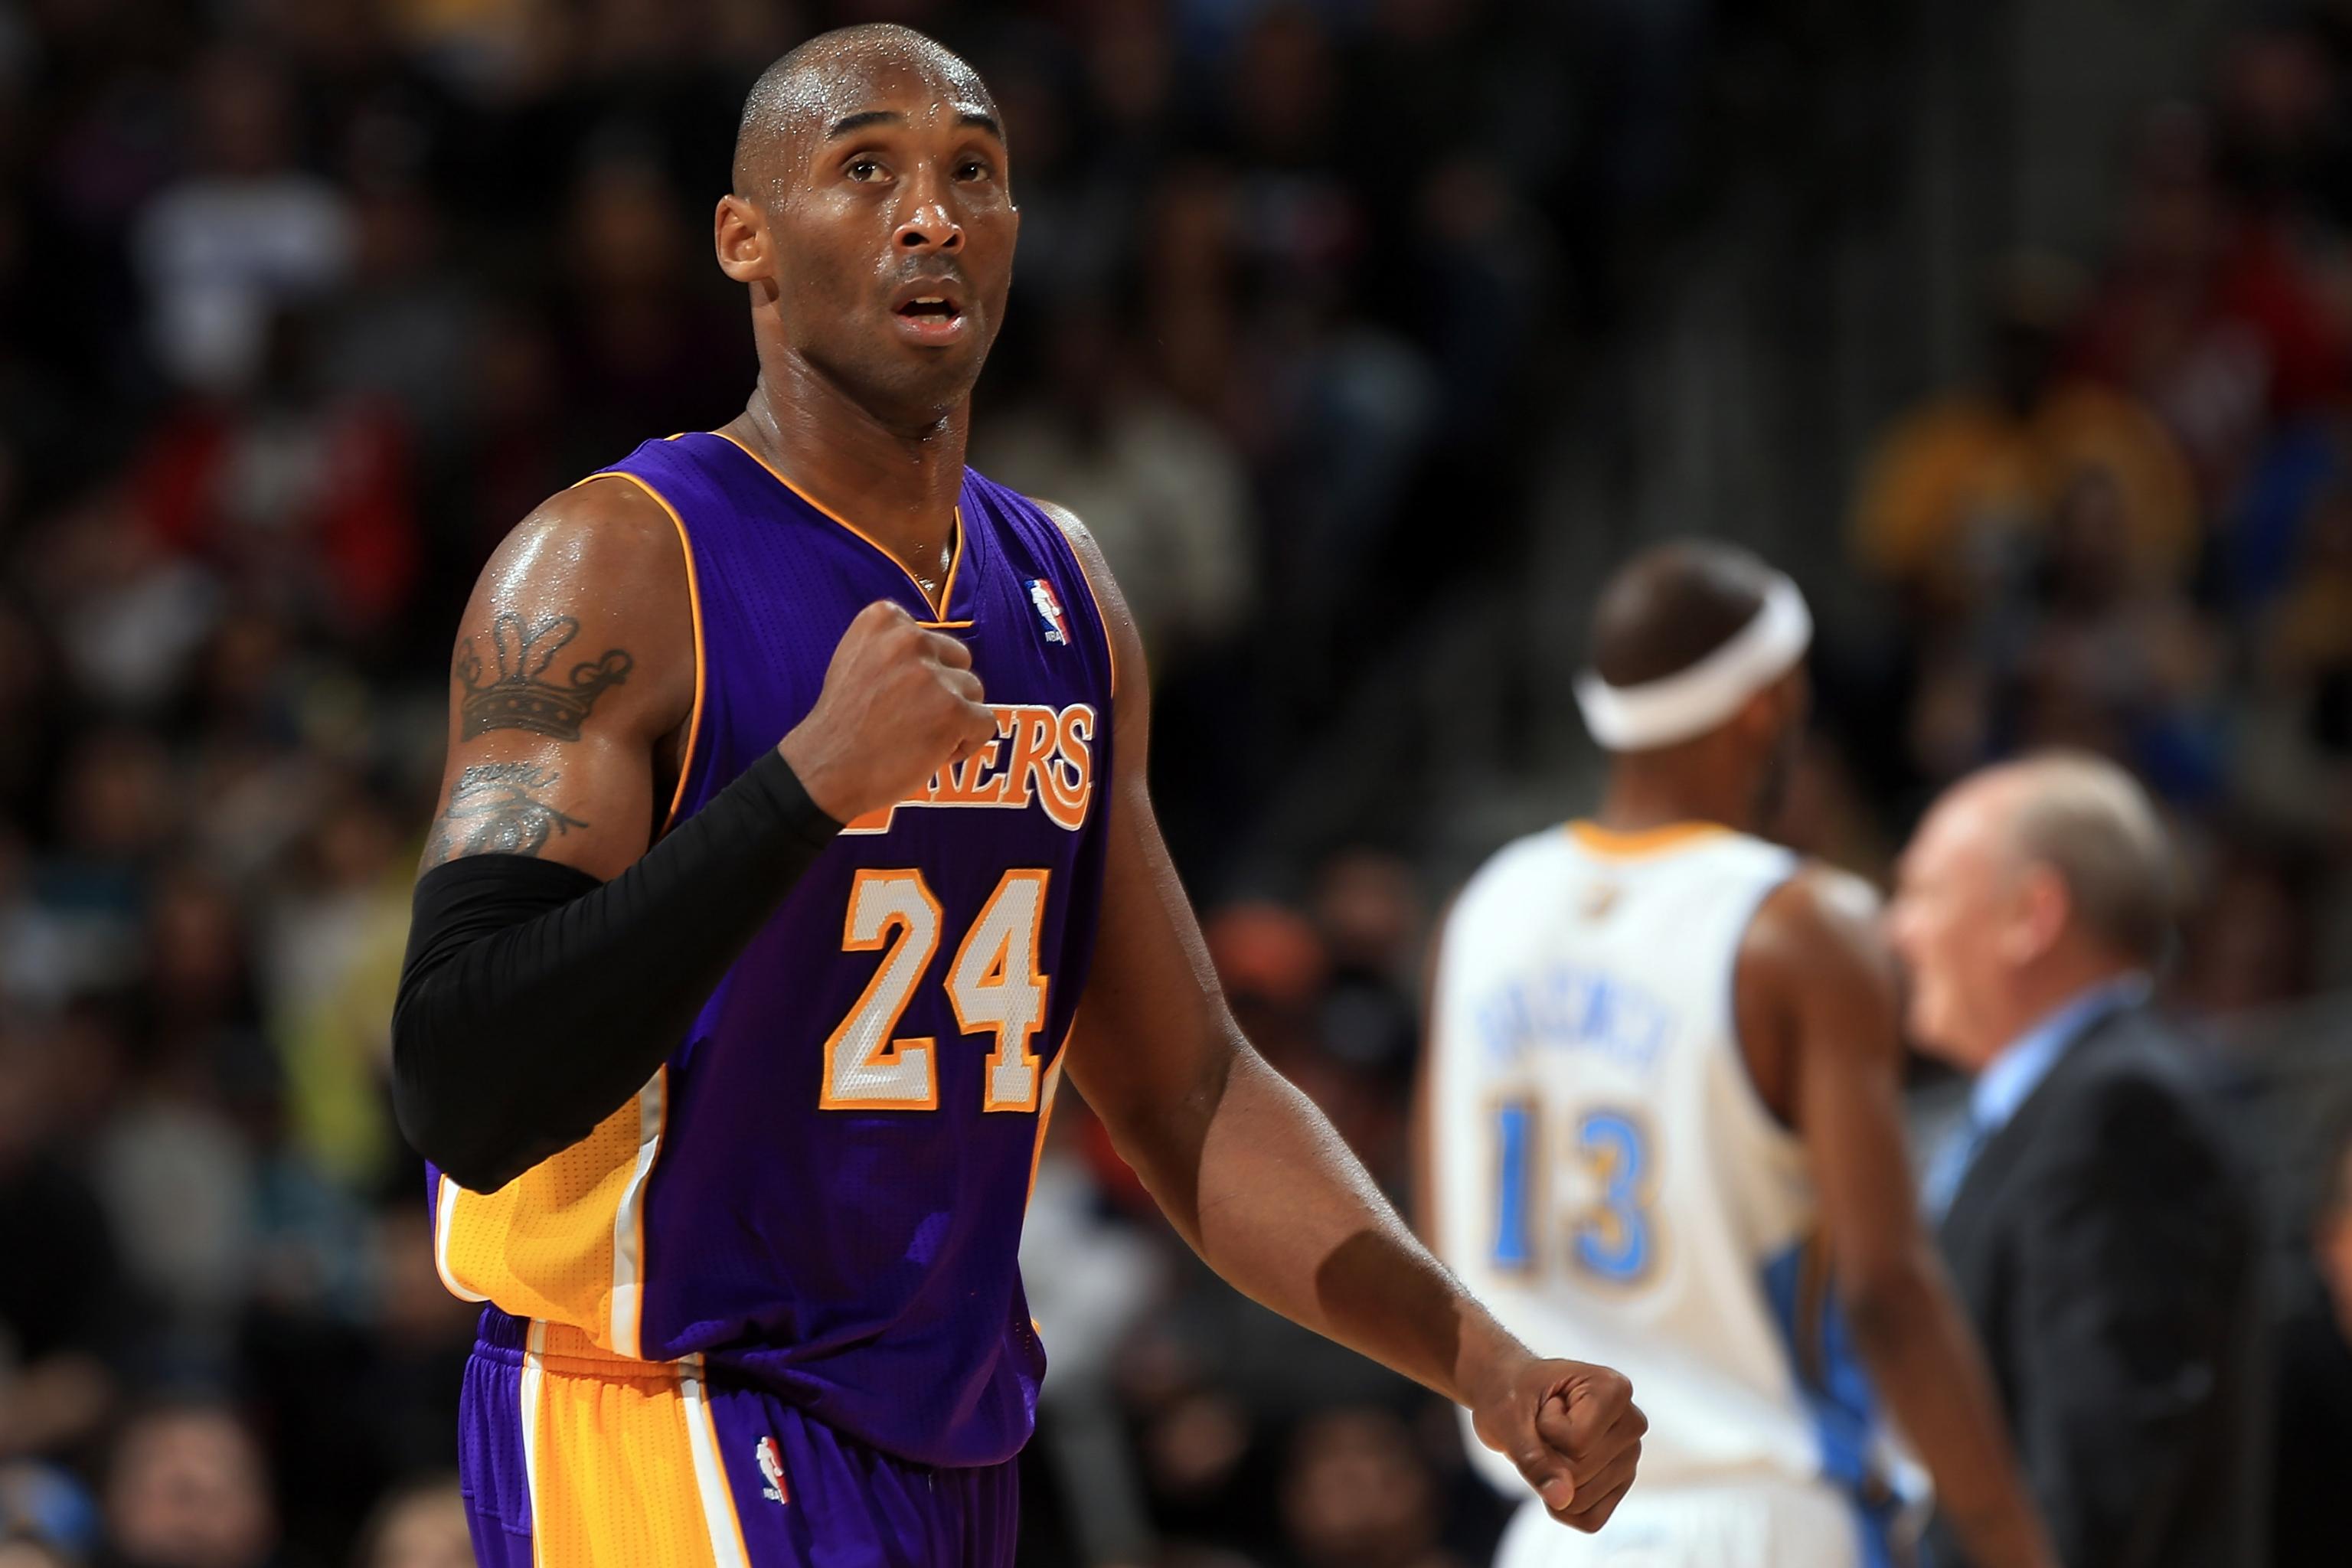 Lakers vs. Nuggets prediction and odds for Monday, January 9